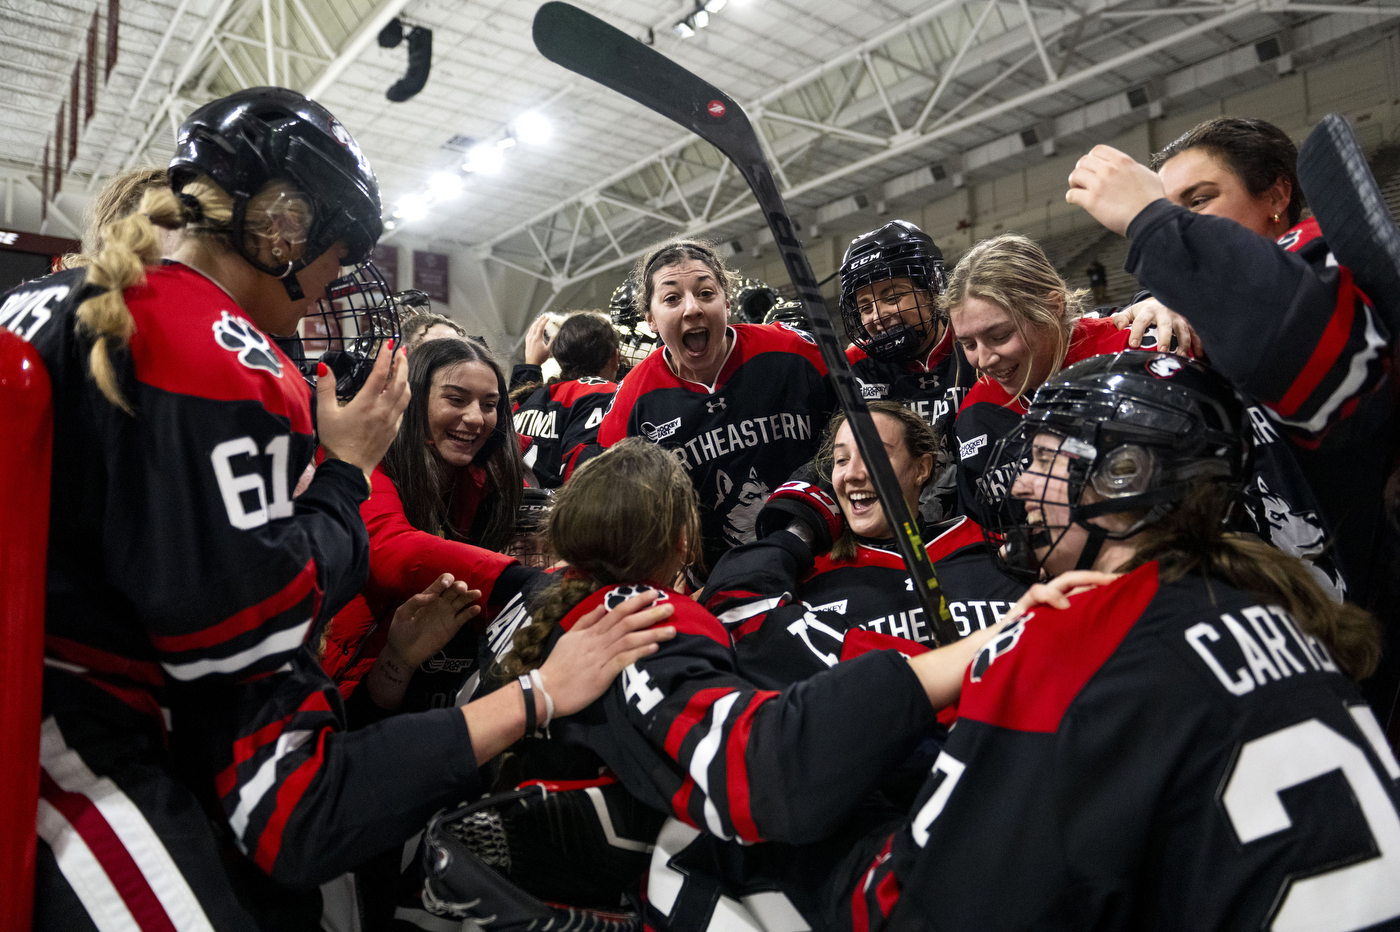 Members of the Northeastern women's hockey team huddle together in celebration